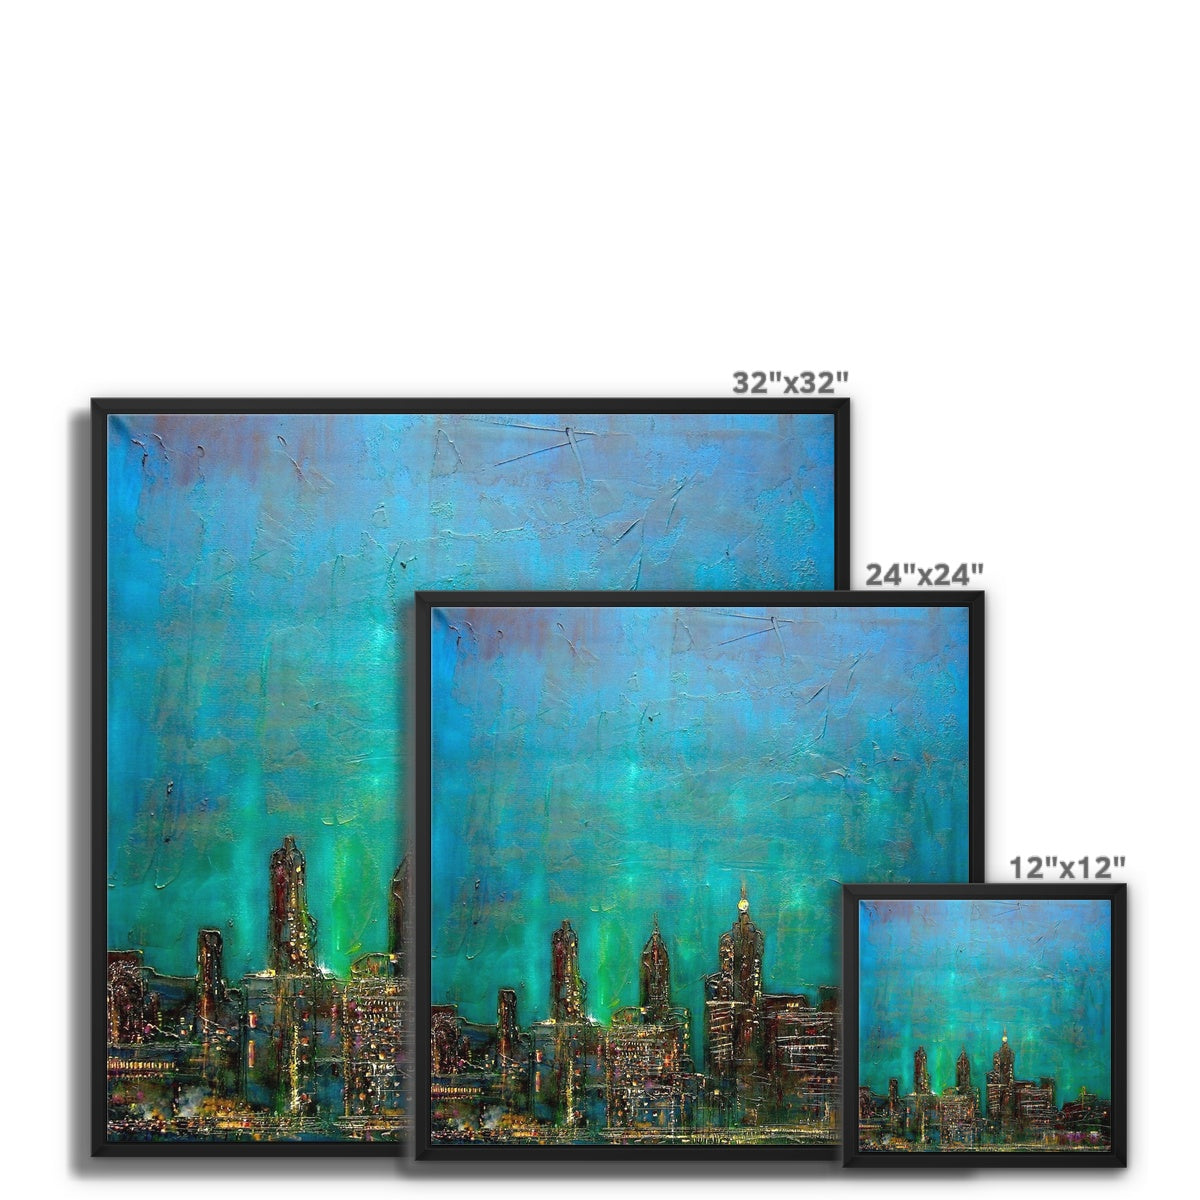 New York Nights Painting | Framed Canvas From Scotland-Floating Framed Canvas Prints-World Art Gallery-Paintings, Prints, Homeware, Art Gifts From Scotland By Scottish Artist Kevin Hunter